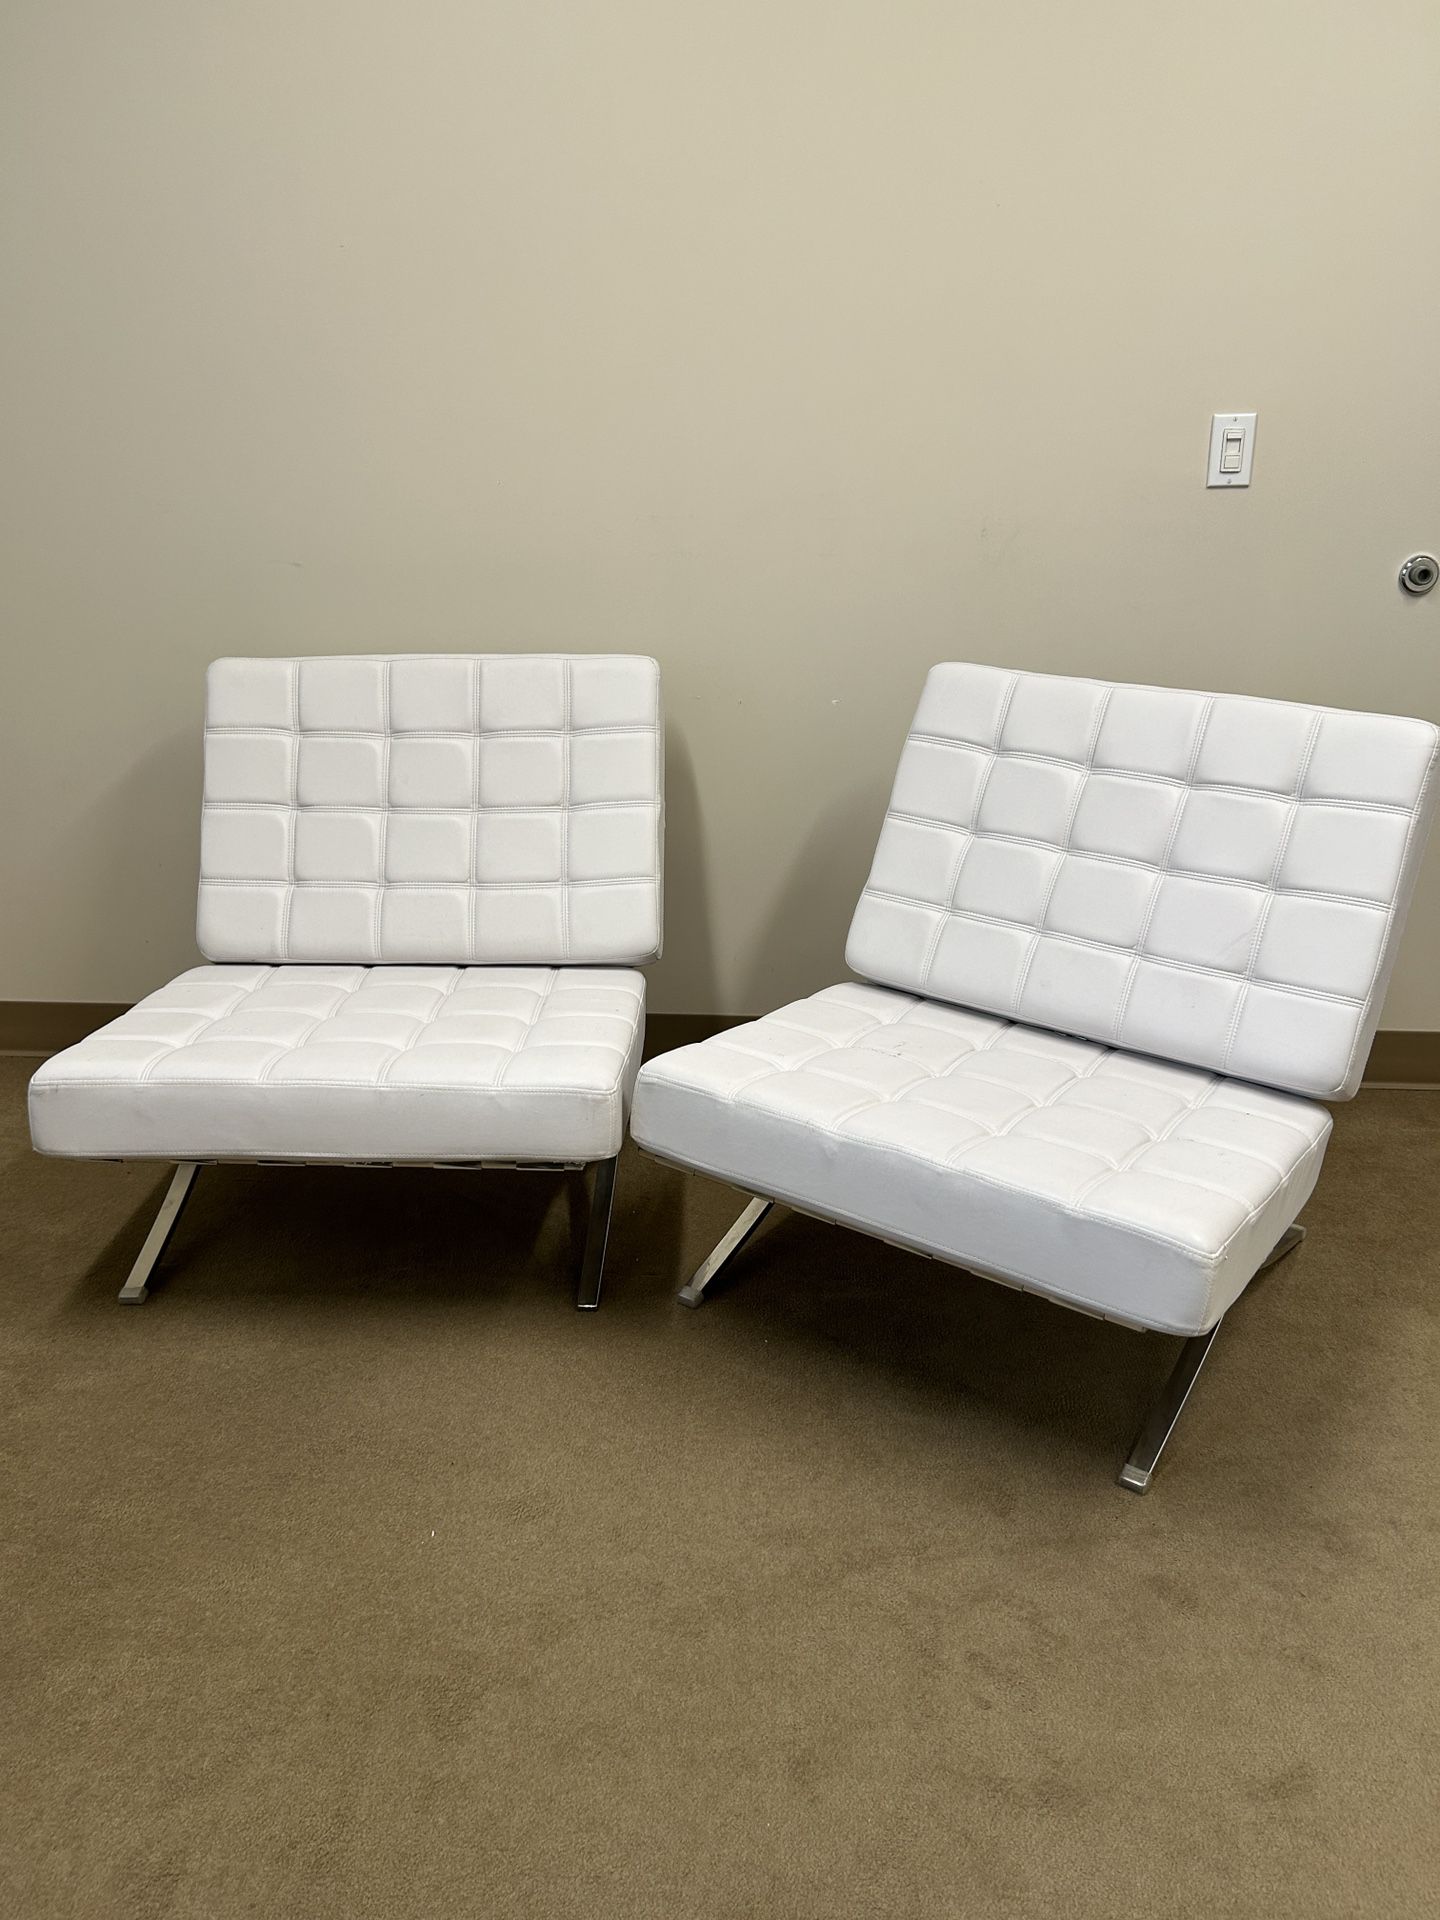 Accent Chair with White Leather-like Vinyl $66 Each Or $112 For Both (Local Pick Up Only)